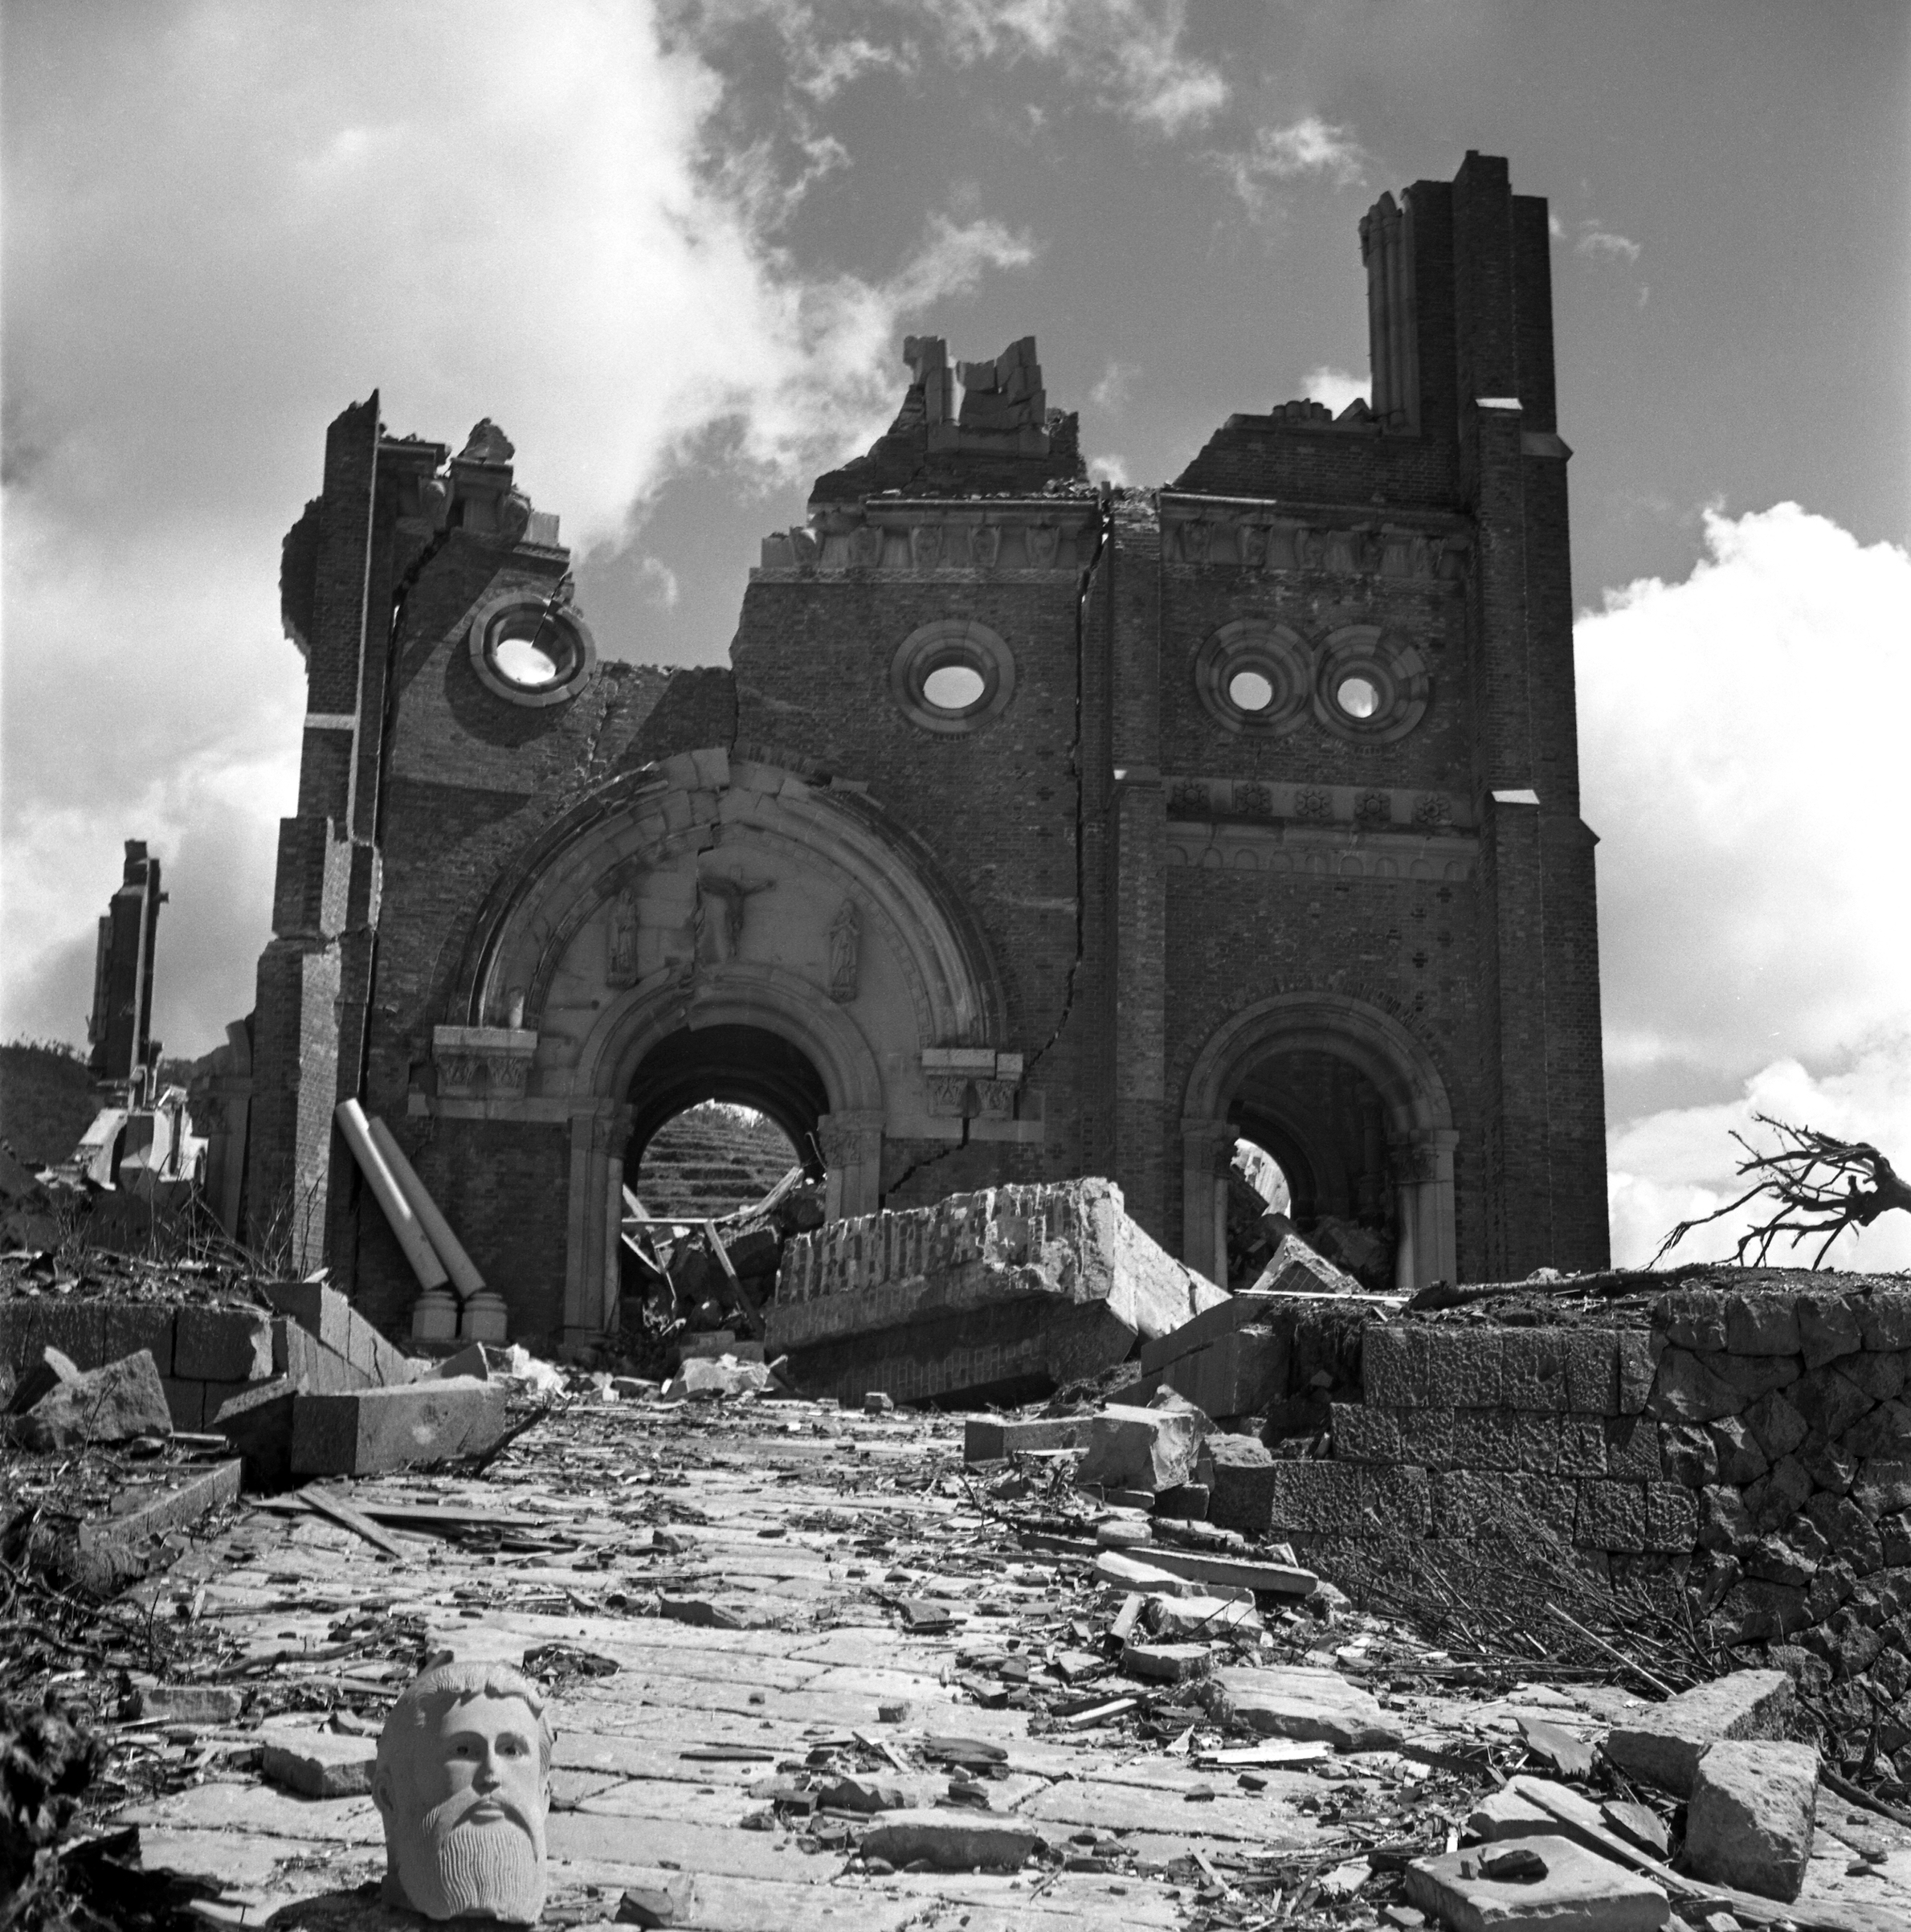 Urakami Cathedral stands in the ruins and destruction after the atomic bomb fell on Nagasaki (Bernard Hoffman/The LIFE Picture Collection via Getty Images)